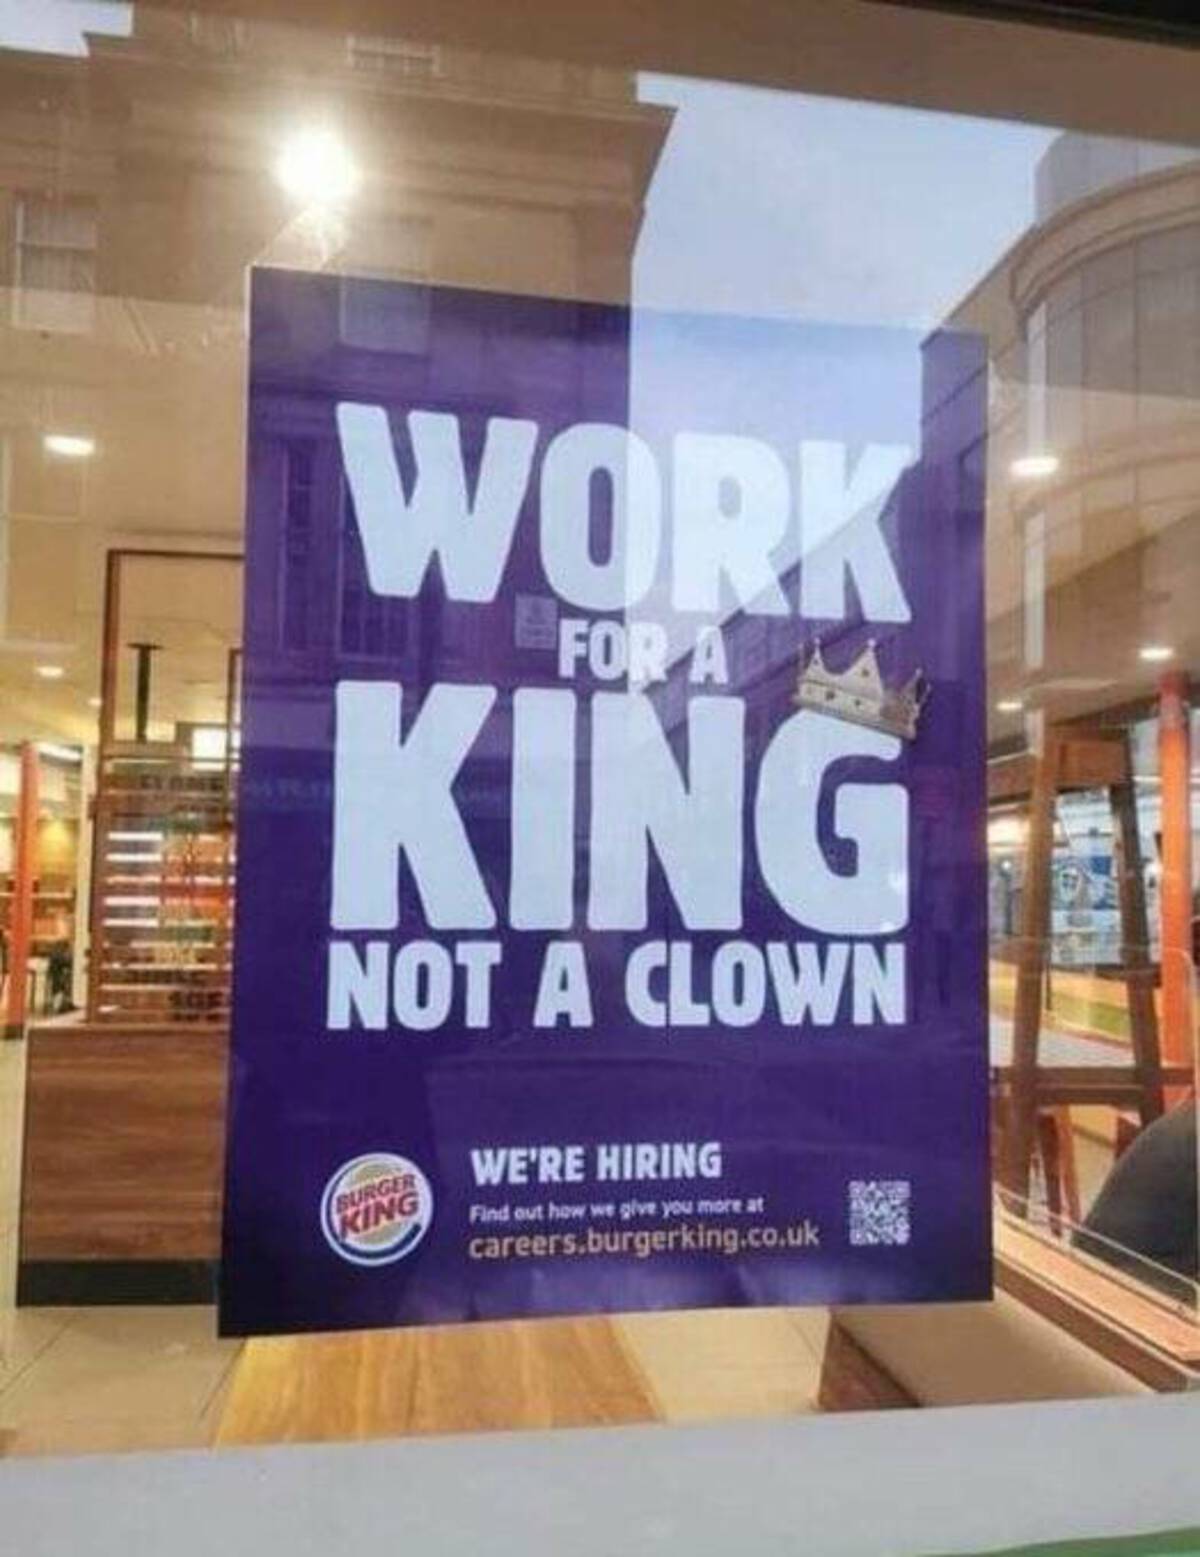 burger king ad mcdonalds - Work For Aa King Not A Clown Burger King We'Re Hiring Find out how we give you more at careers.burgerking.co.uk